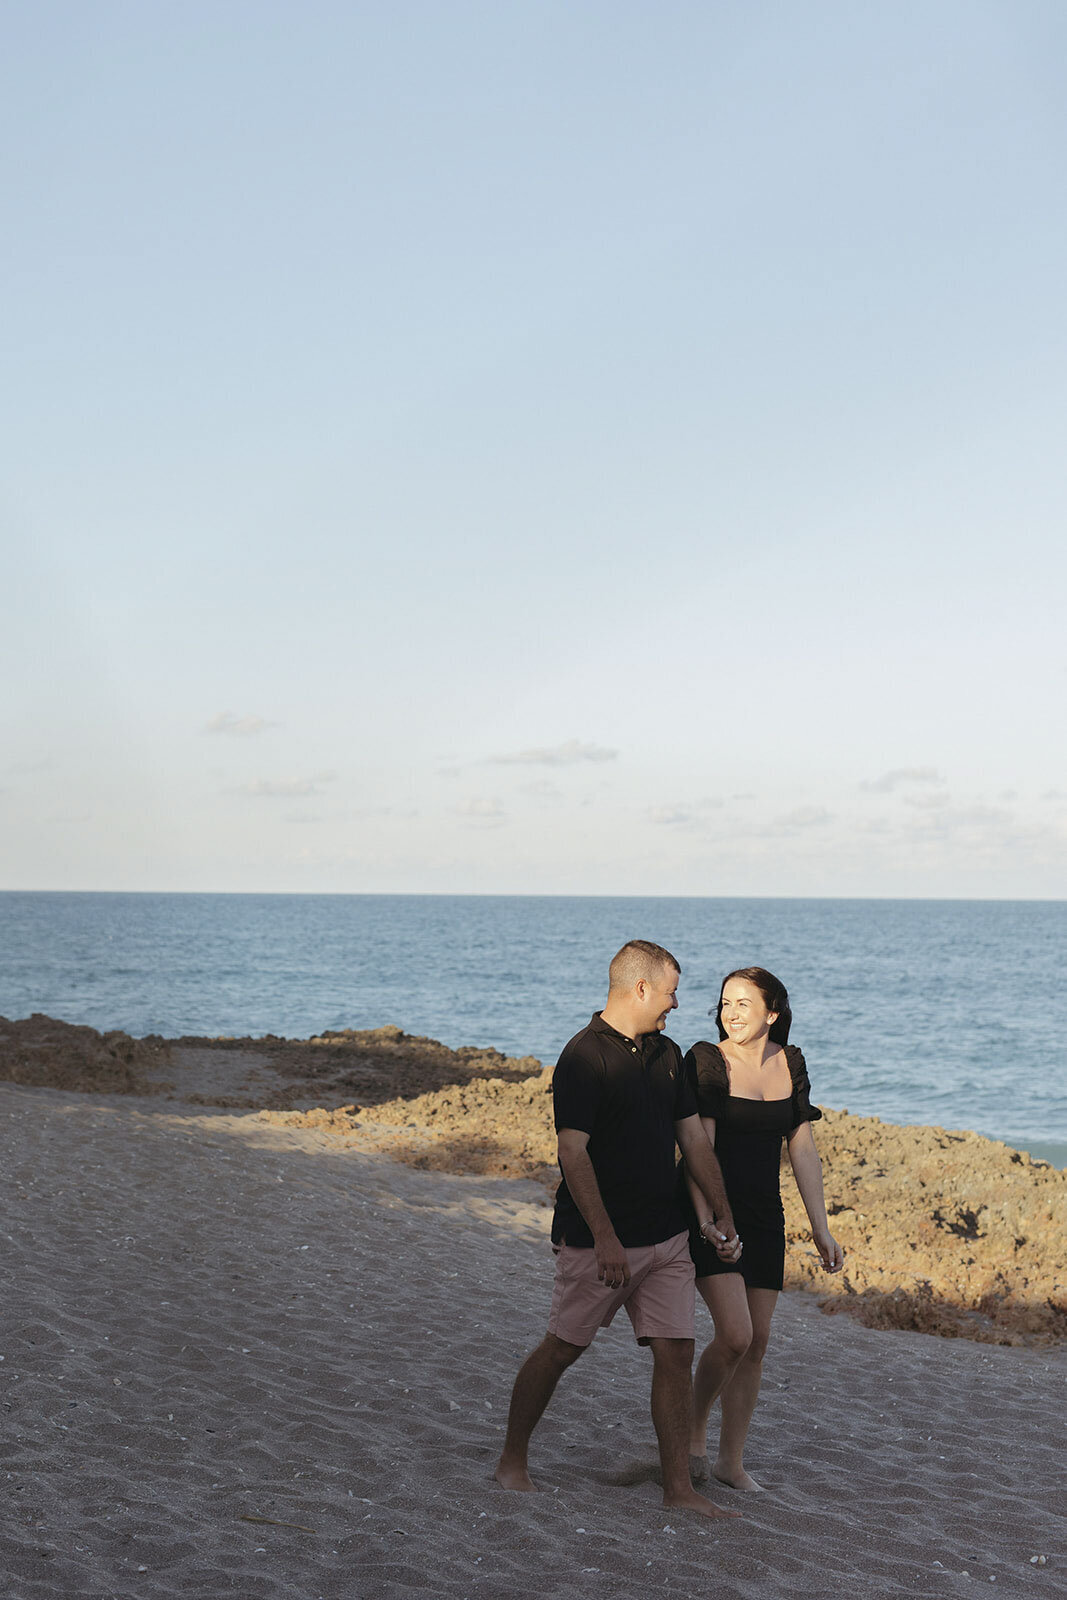 Couple walking and looking at each other on a beach